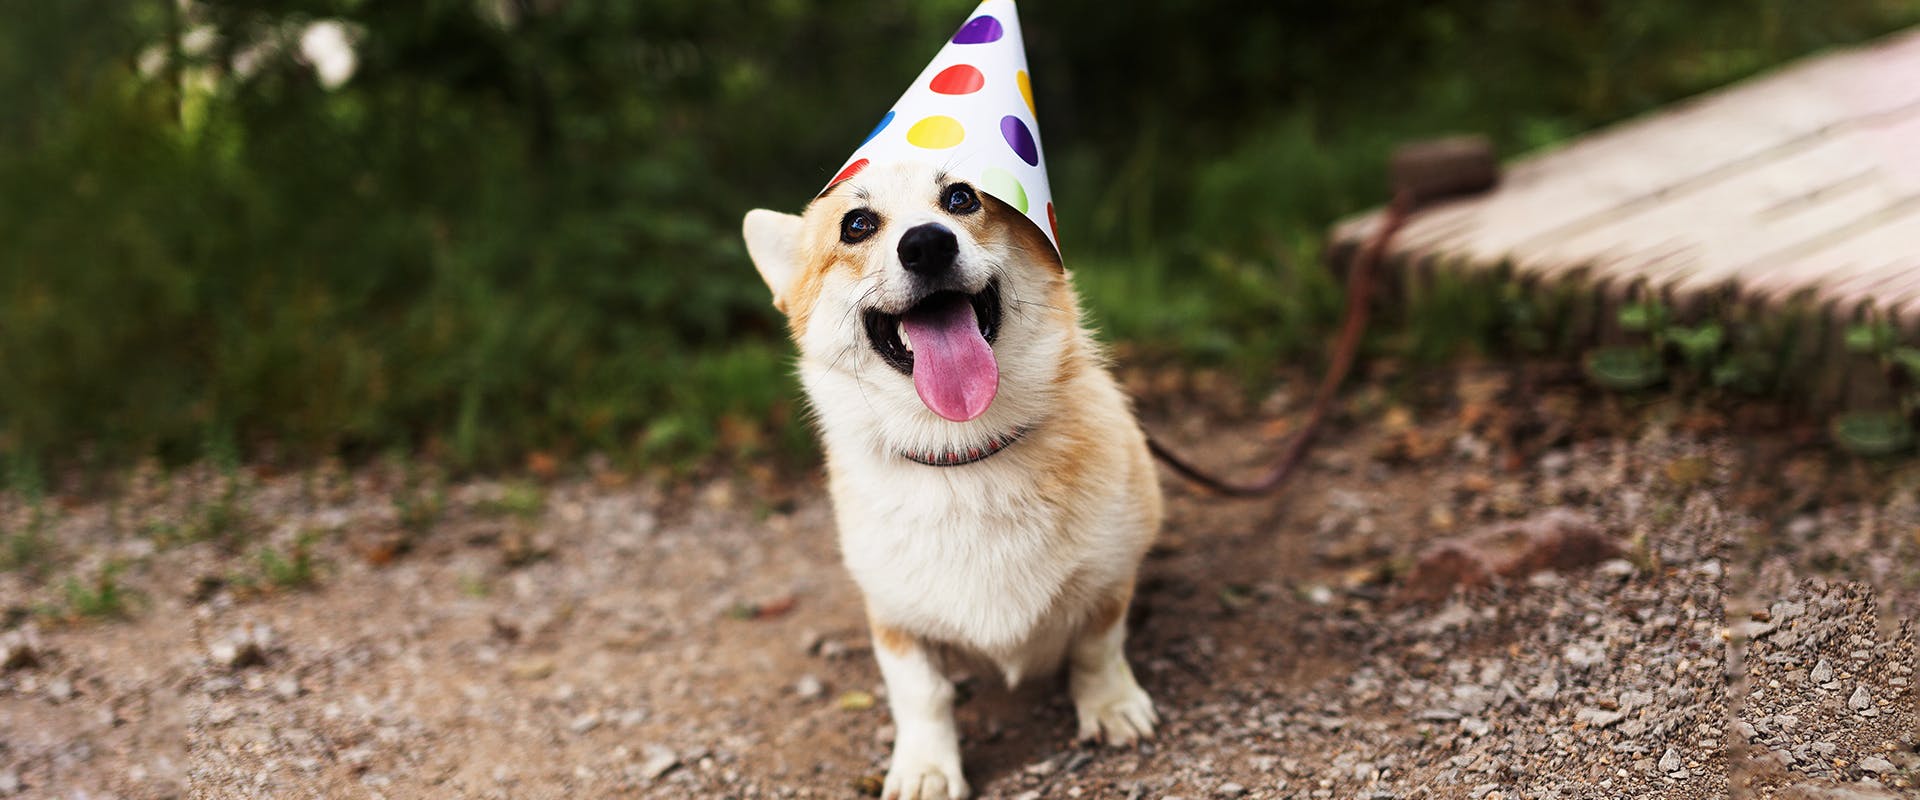 A happy Corgi wearing a party hat, standing outdoors